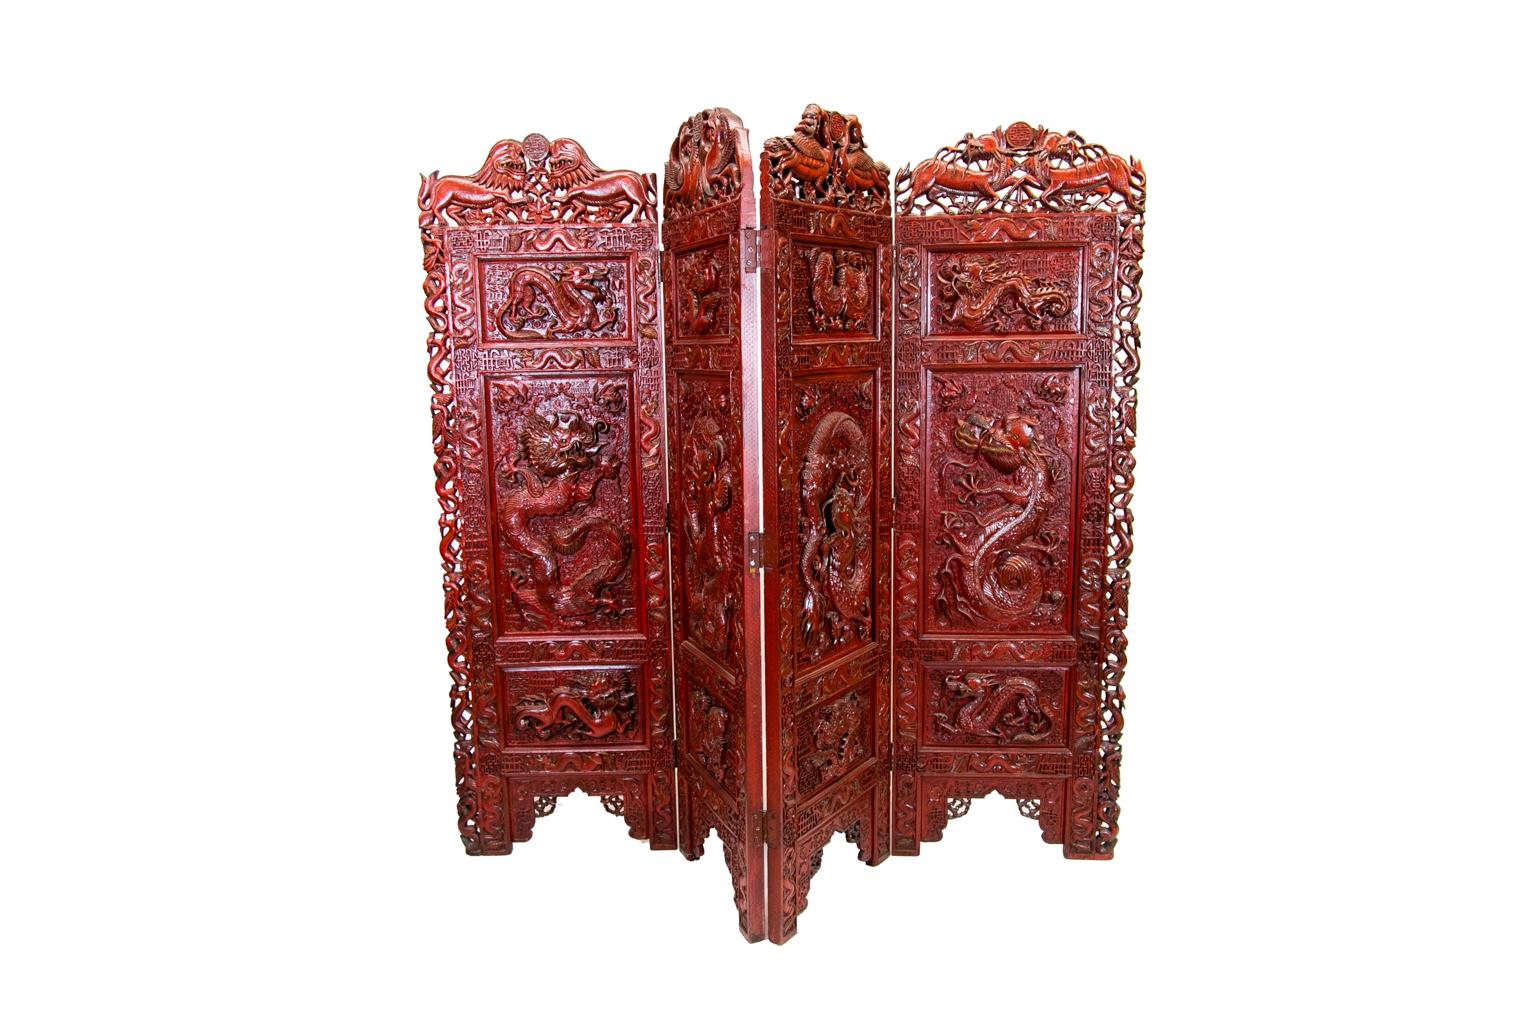 Chinese carved teak wood red lacquered four panel screen has elaborate intricate carving on both front and back sides. The front motif is of carved dragons with various Chinese characters. The back side is carved with urns, cattails, and flowers.
 